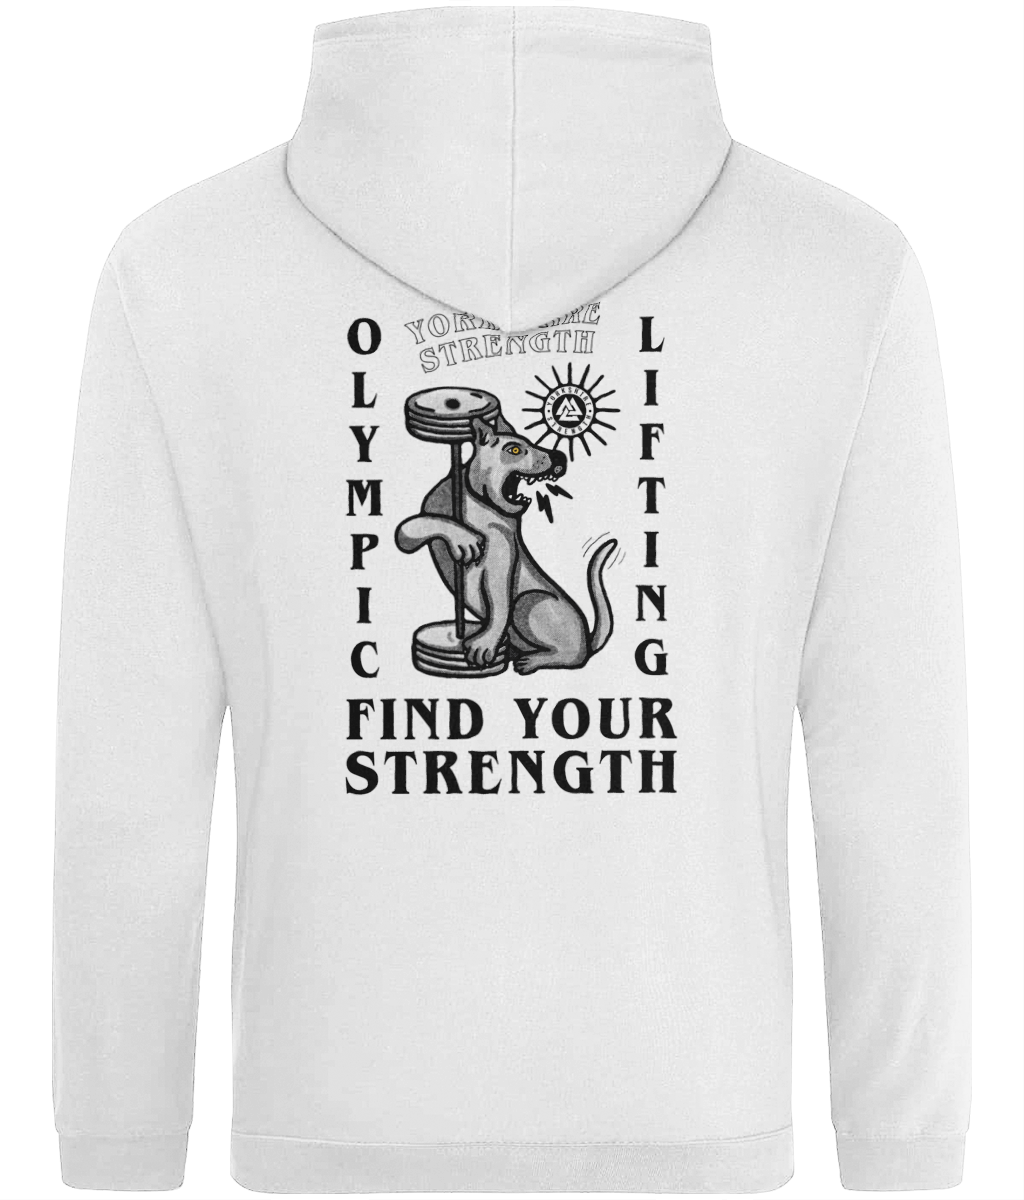 Find your strength hoodie - Yorkshire Strength